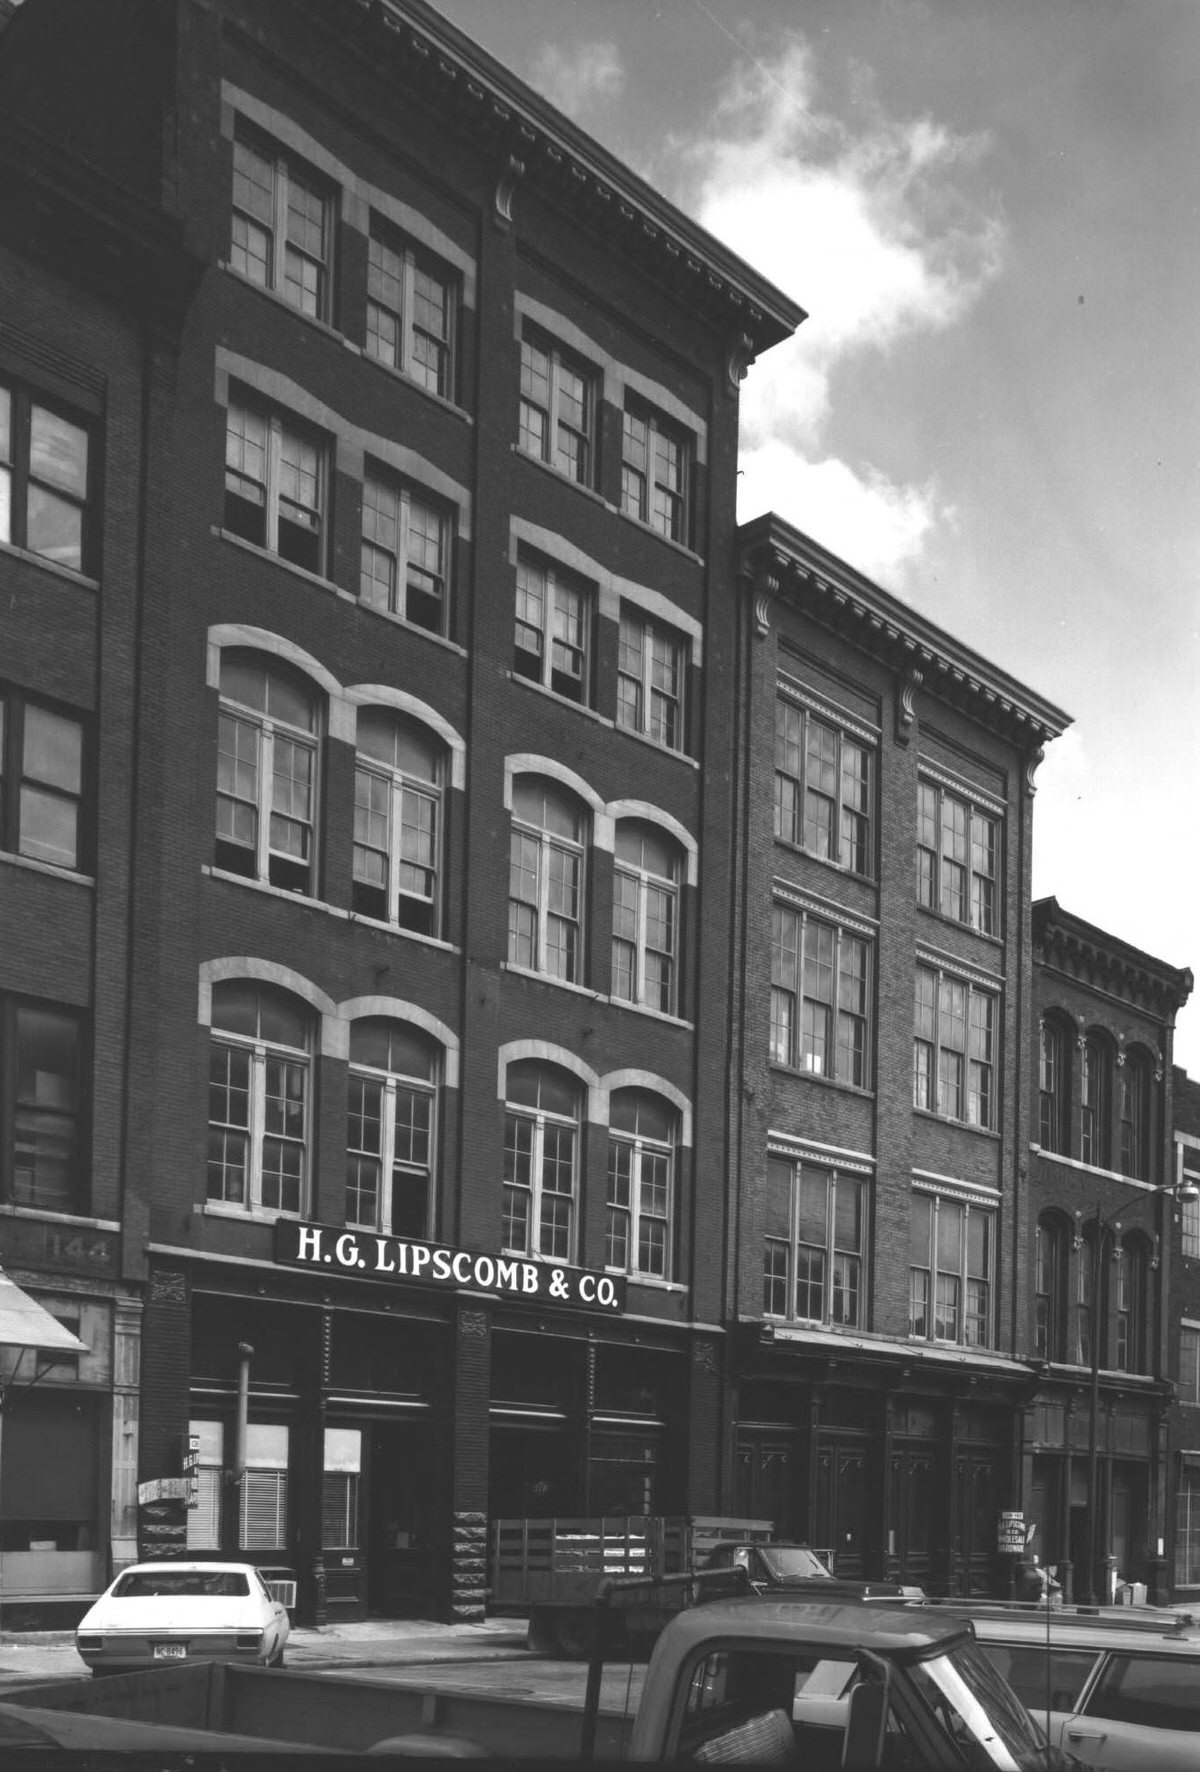 H.G. Lipscomb & Co. and Charles Nelson & Co. buildings, 1970